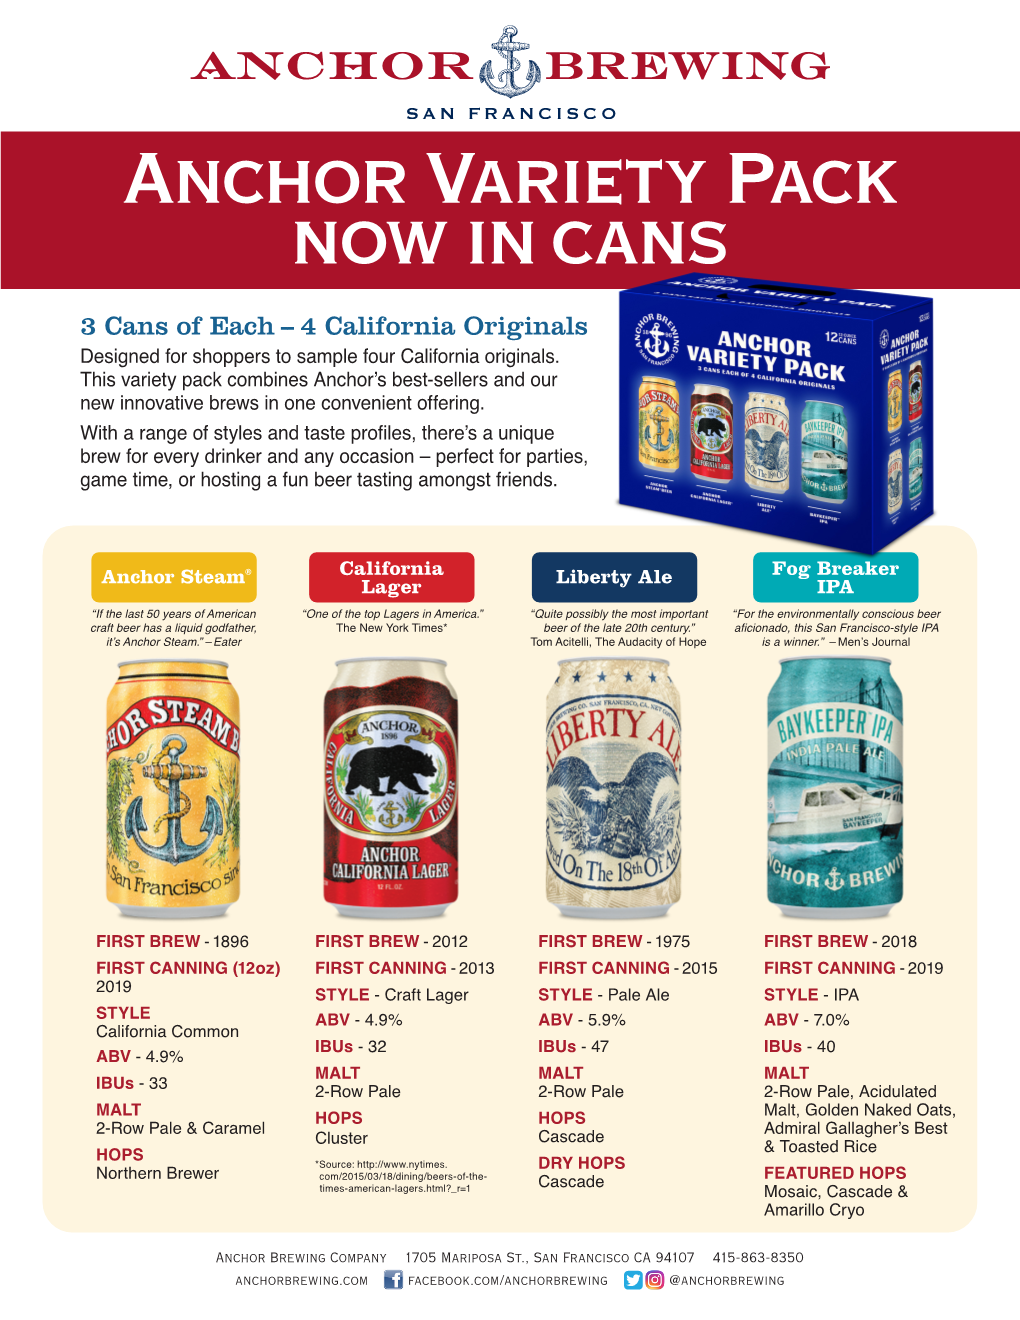 Anchor Variety Pack Now in Cans 3 Cans of Each -- 4 California Originals Designed for Shoppers to Sample Four California Originals